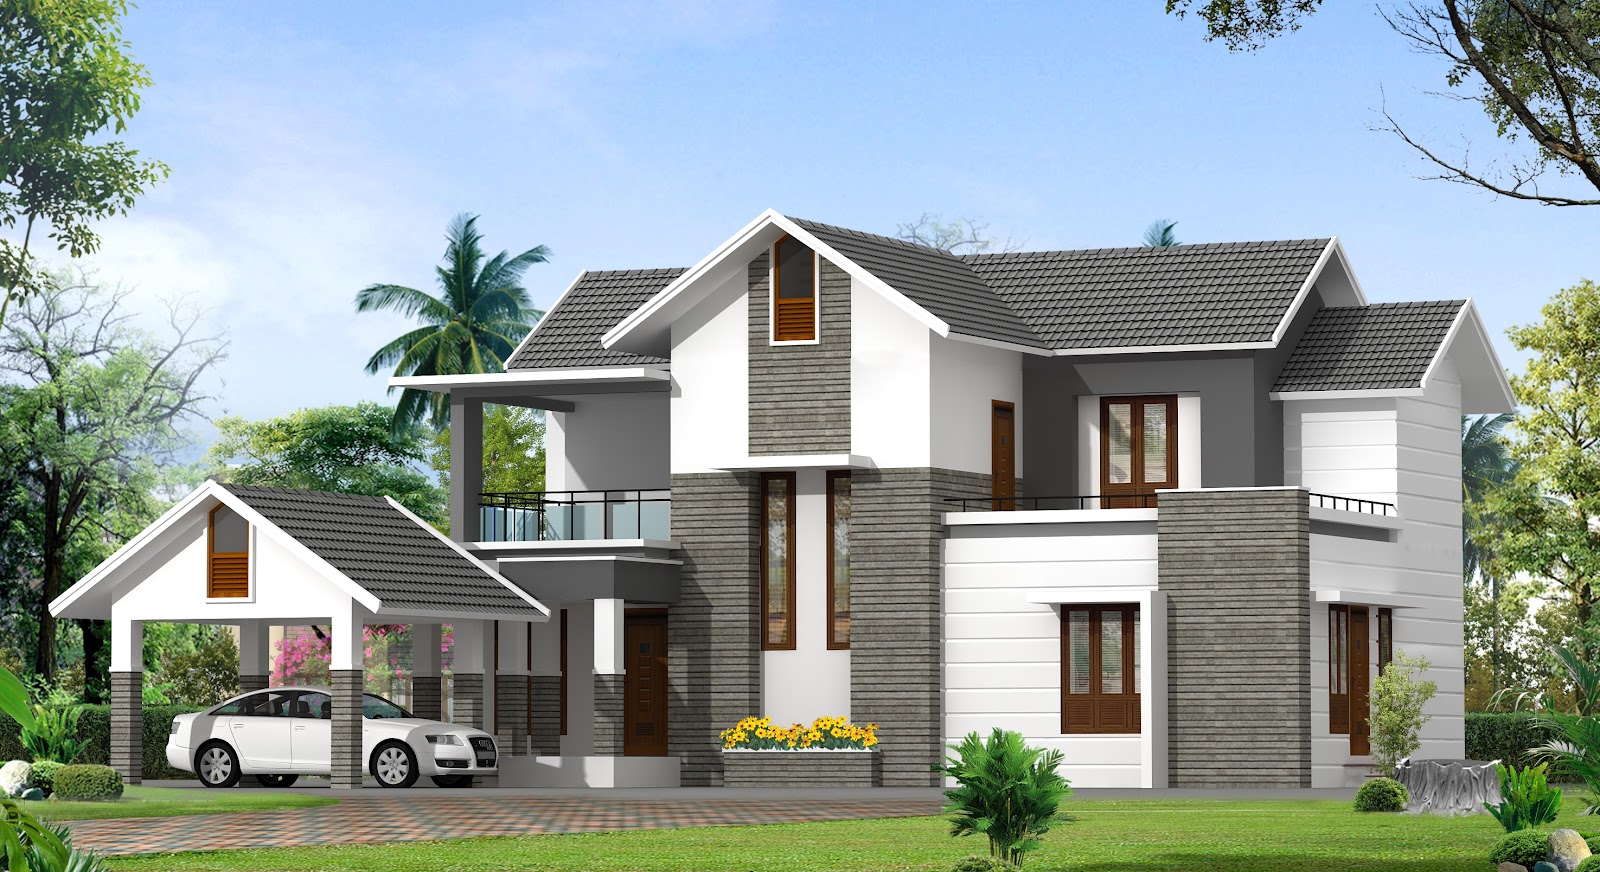 Bungalow Design Images 25900 Wallpapers Free Home Decoration HD